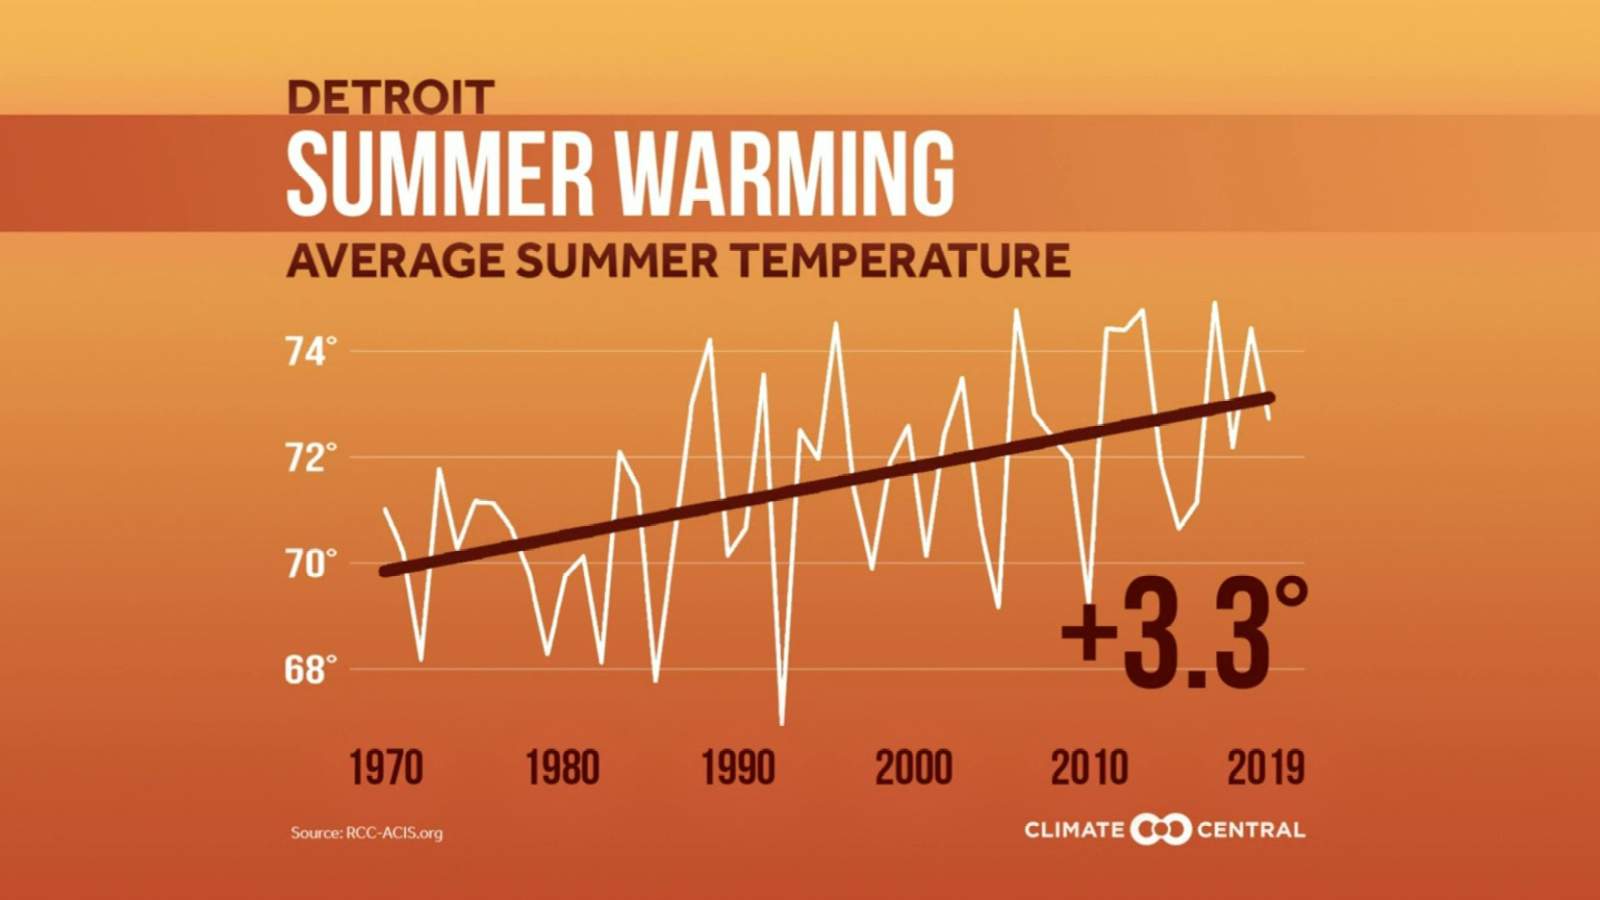 Detroit climate warming: Average summer temperature up 3 degrees since 1970